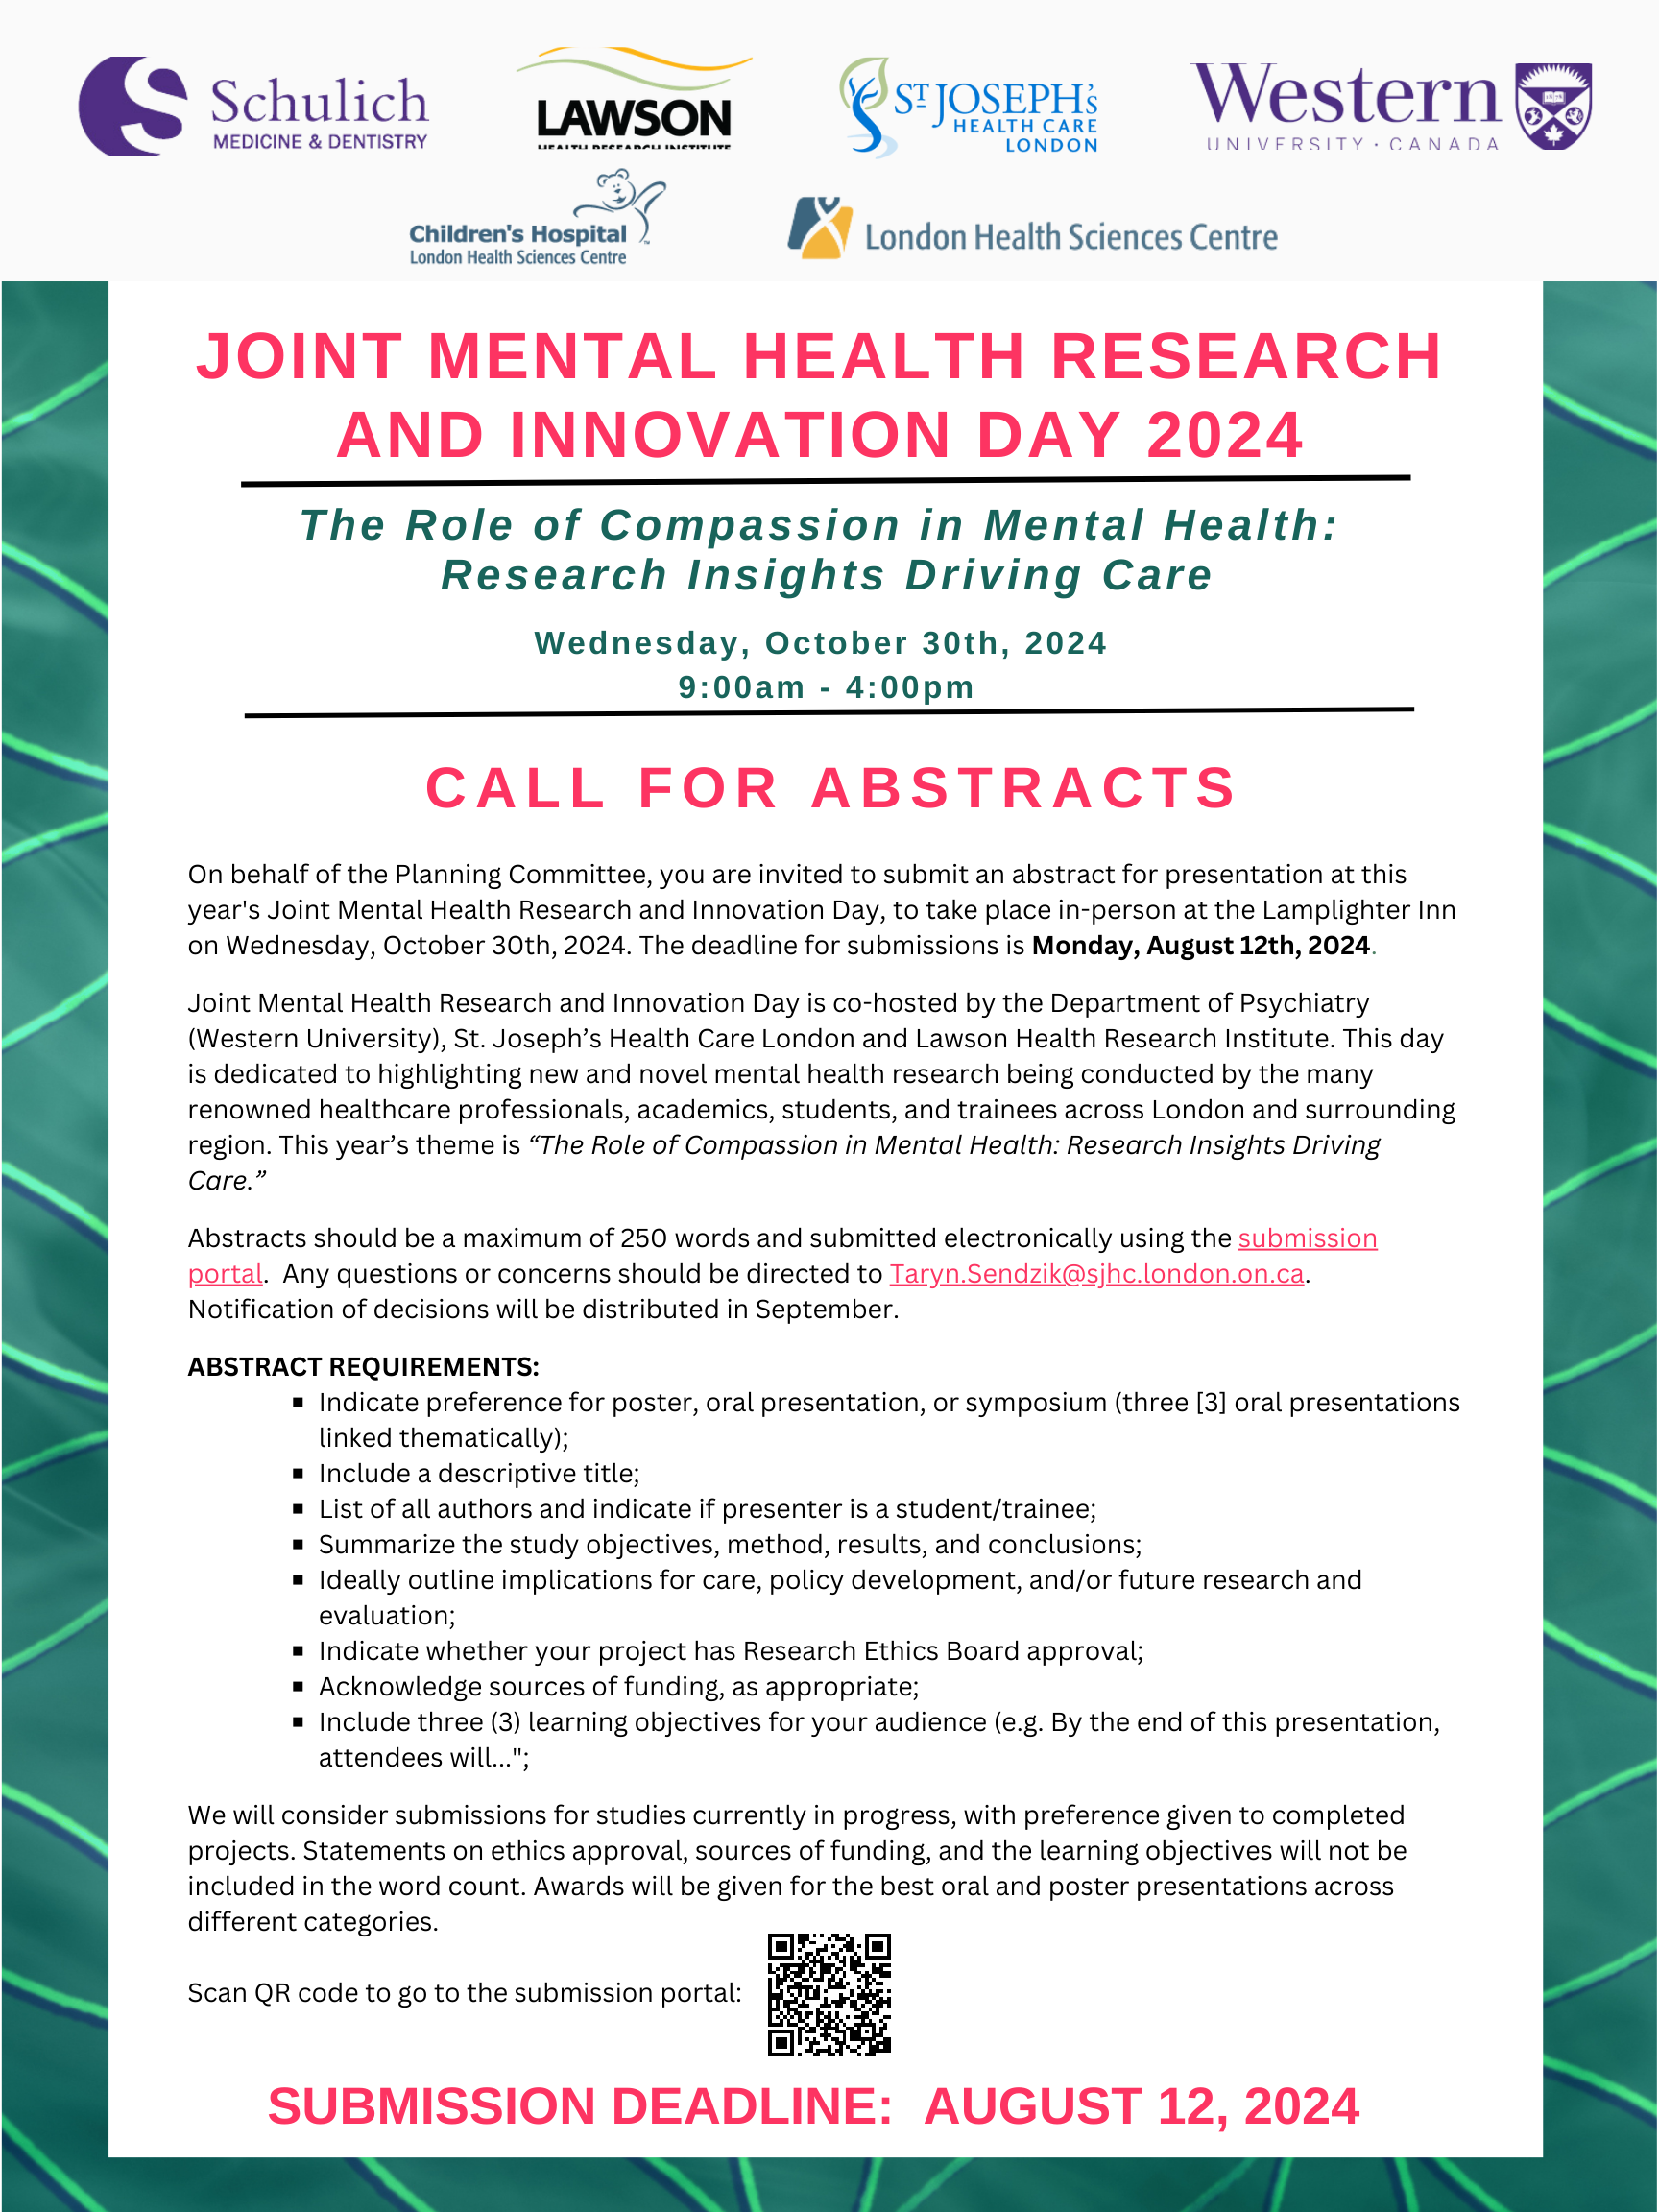 JMHRID-2024_Call-for-Abstracts.pdf.png